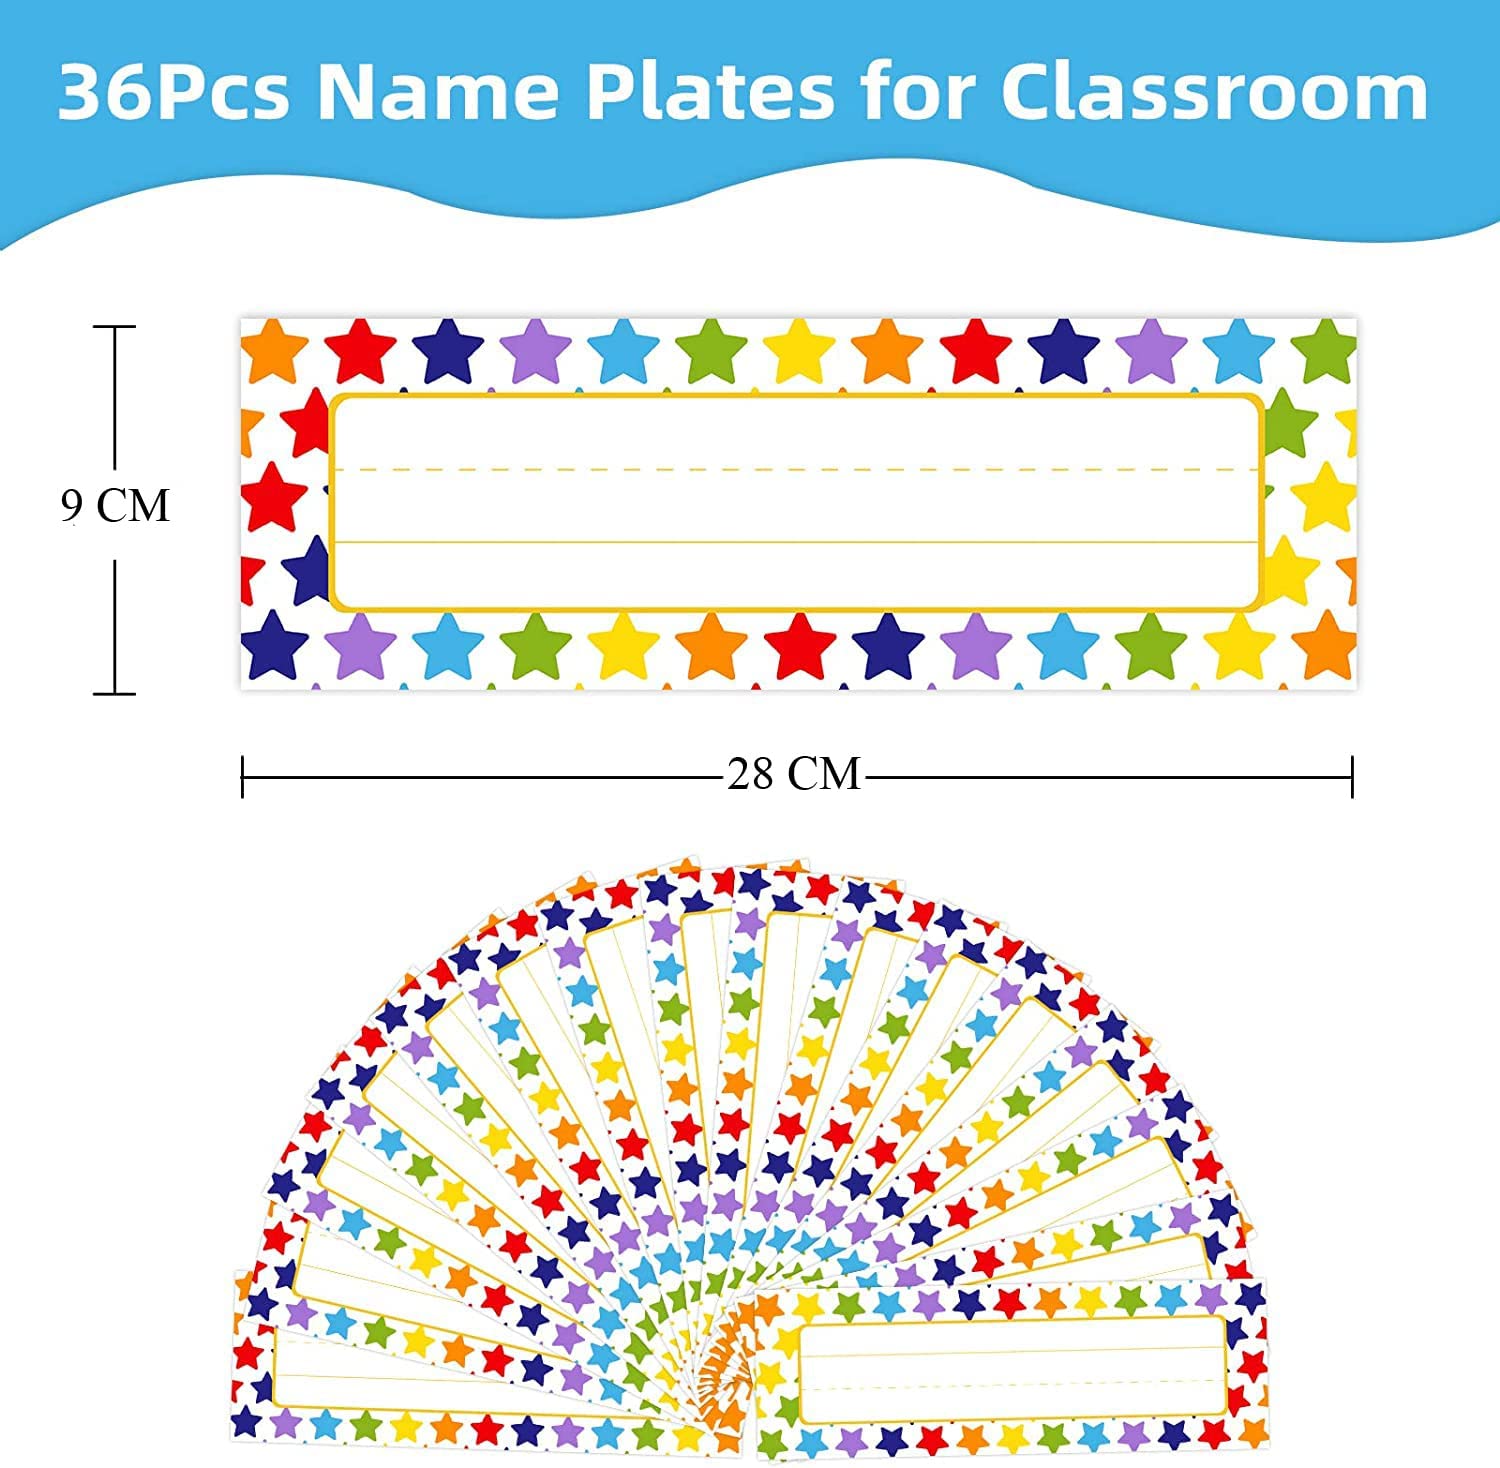 name tage Stickers with stars design 36 Pieces - Multi Color